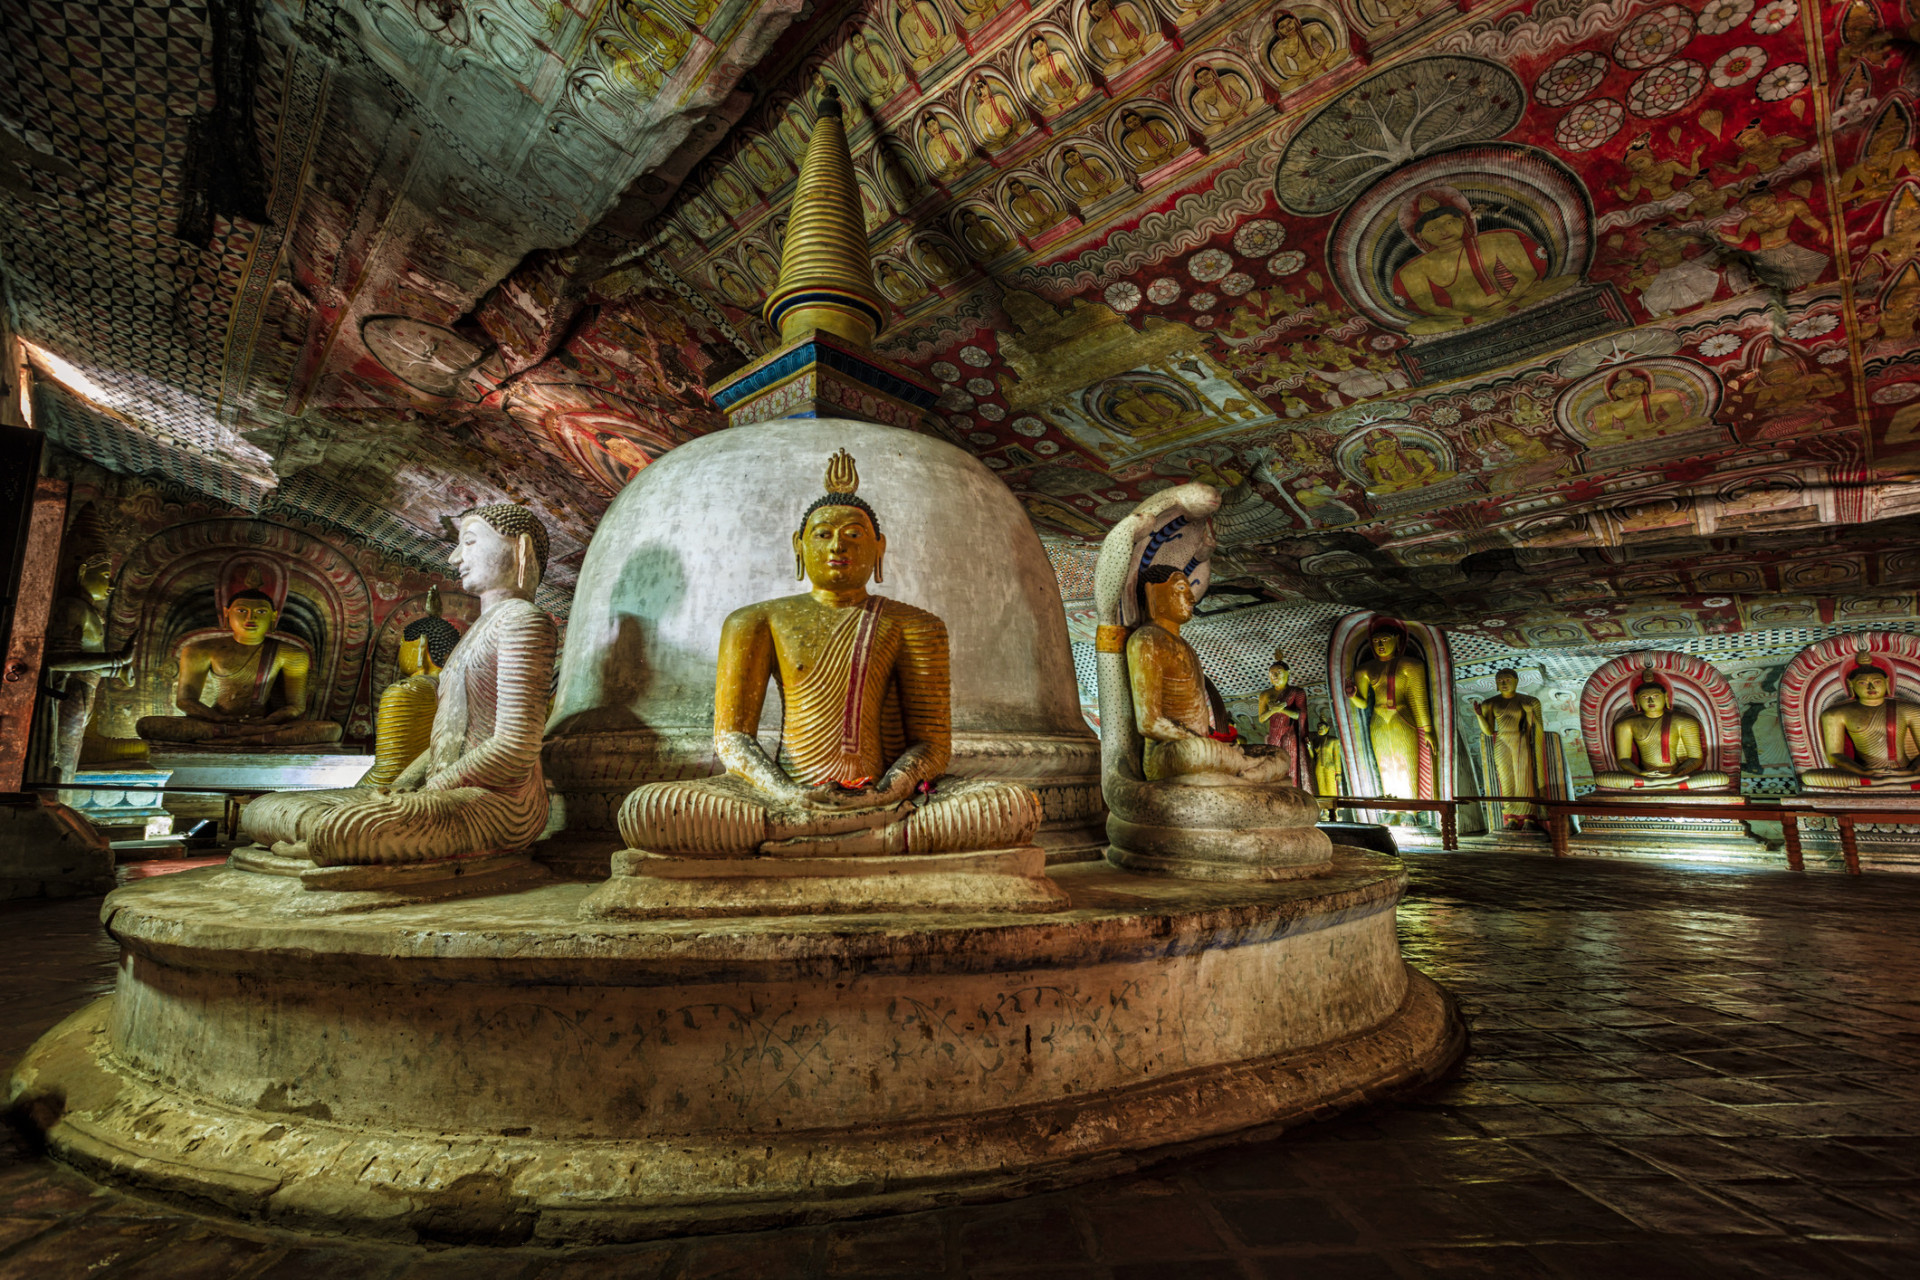 Also referred to as the Golden Temple of Dambulla, this is the most expansive and best-preserved cave complex in the country, and contains over 150 <a href="https://uk.starsinsider.com/lifestyle/216949/south-korean-kids-become-monks-to-celebrate-buddhas-birthday">Buddha</a> statues. Its walls are illustrated with ornate murals. The temple is a UNESCO World Heritage Site.<p><a href="https://www.msn.com/en-us/community/channel/vid-7xx8mnucu55yw63we9va2gwr7uihbxwc68fxqp25x6tg4ftibpra?cvid=94631541bc0f4f89bfd59158d696ad7e">Follow us and access great exclusive content every day</a></p>